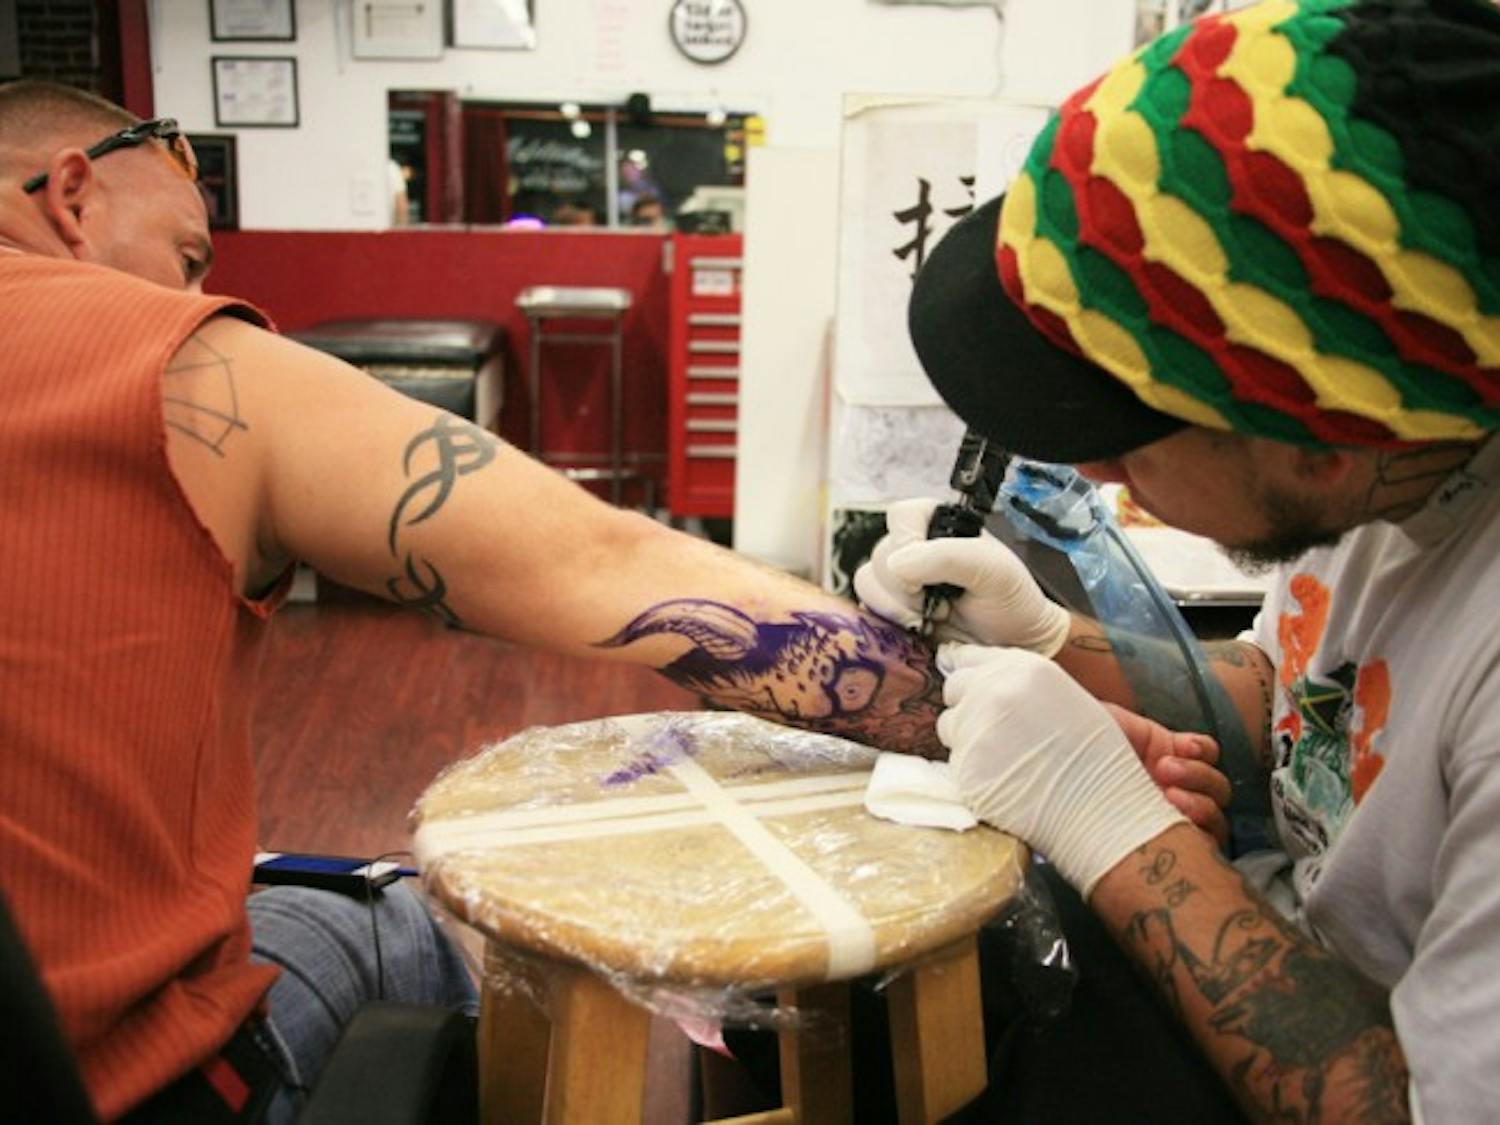 Santa Fe College health science freshman Charles Quinlan, 32, endures the pain of a custom tattoo by Mike Taylor, 23, at Addiction Tattoo and Piercing, 819 W. University Ave., on Sunday evening.